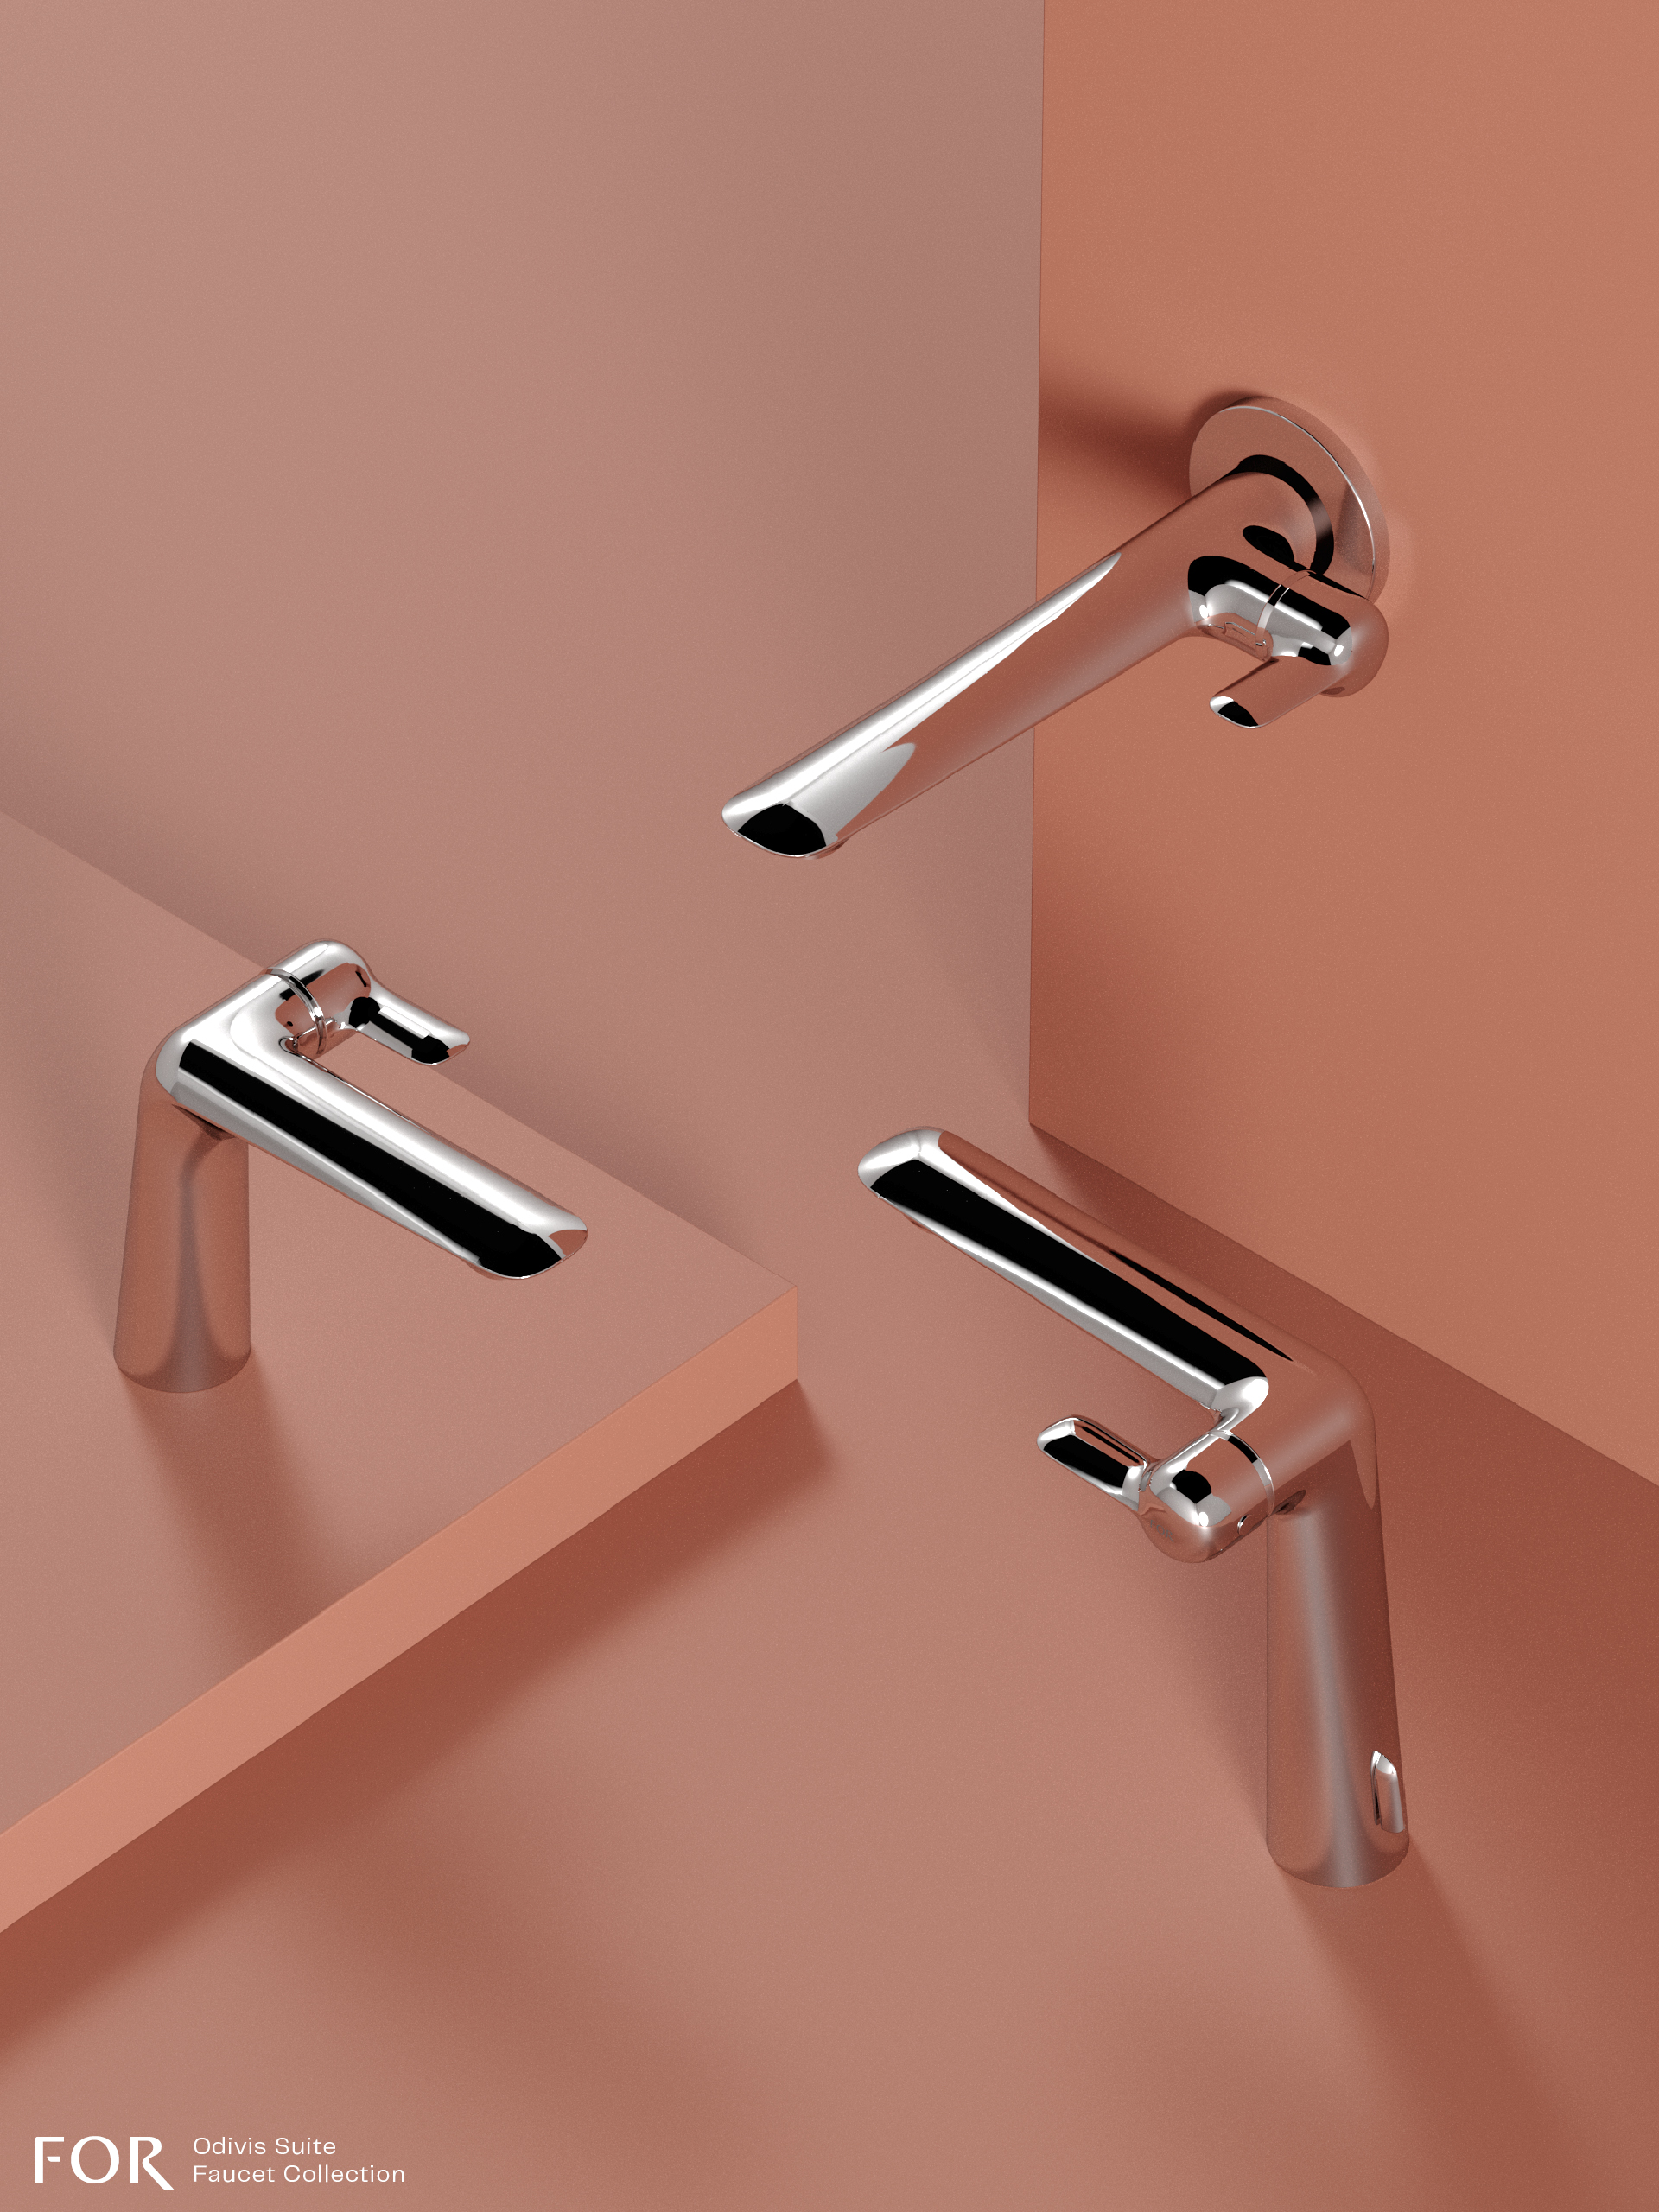 FOR Odivis Suite Faucets